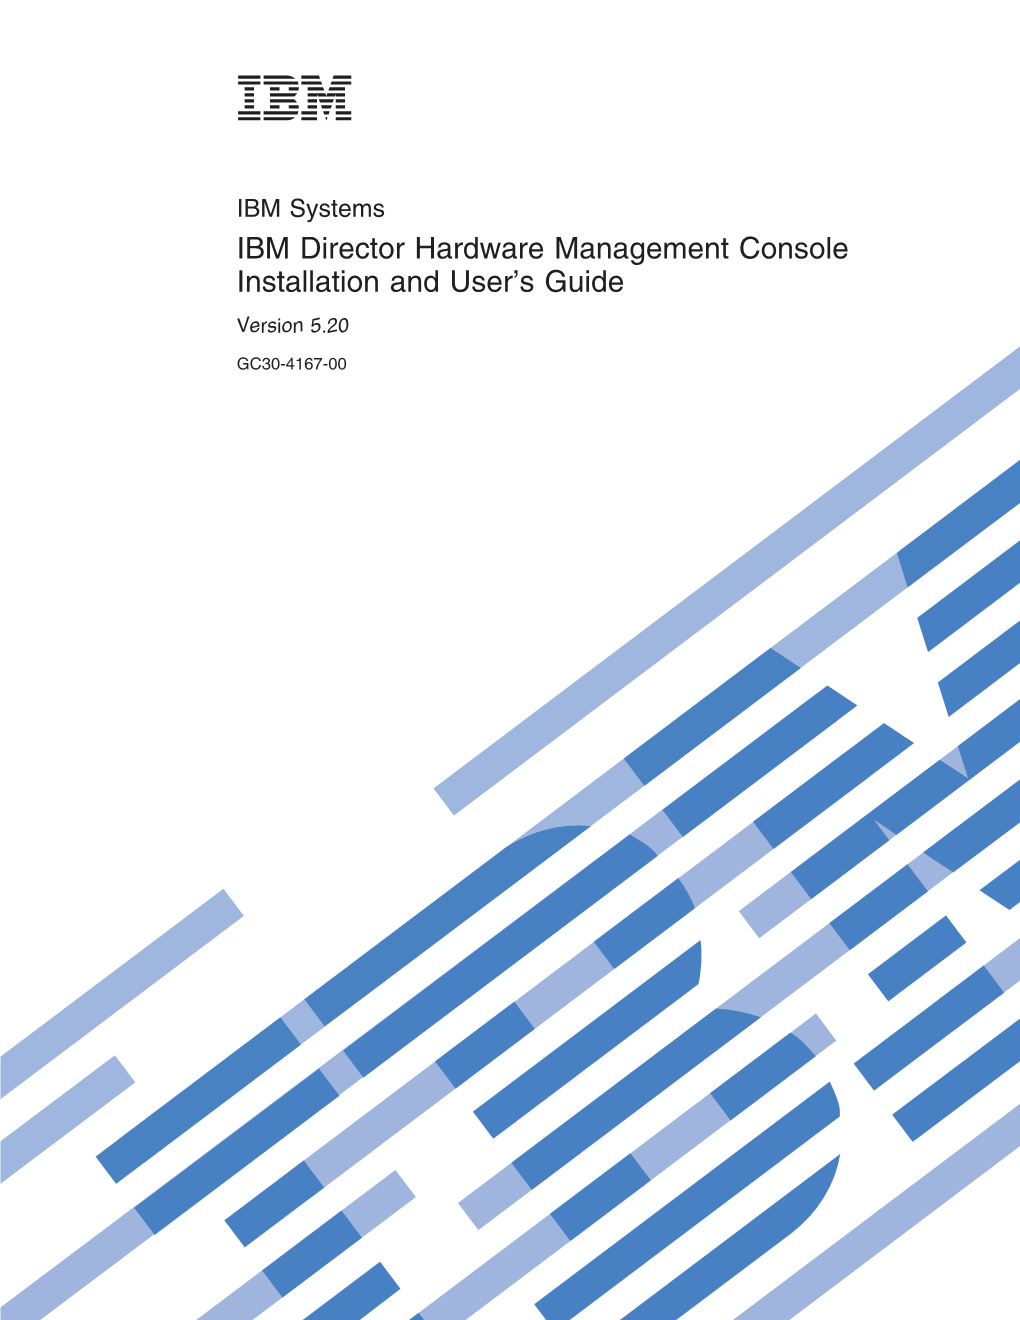 IBM Director Hardware Management Console Installation and User's Guide